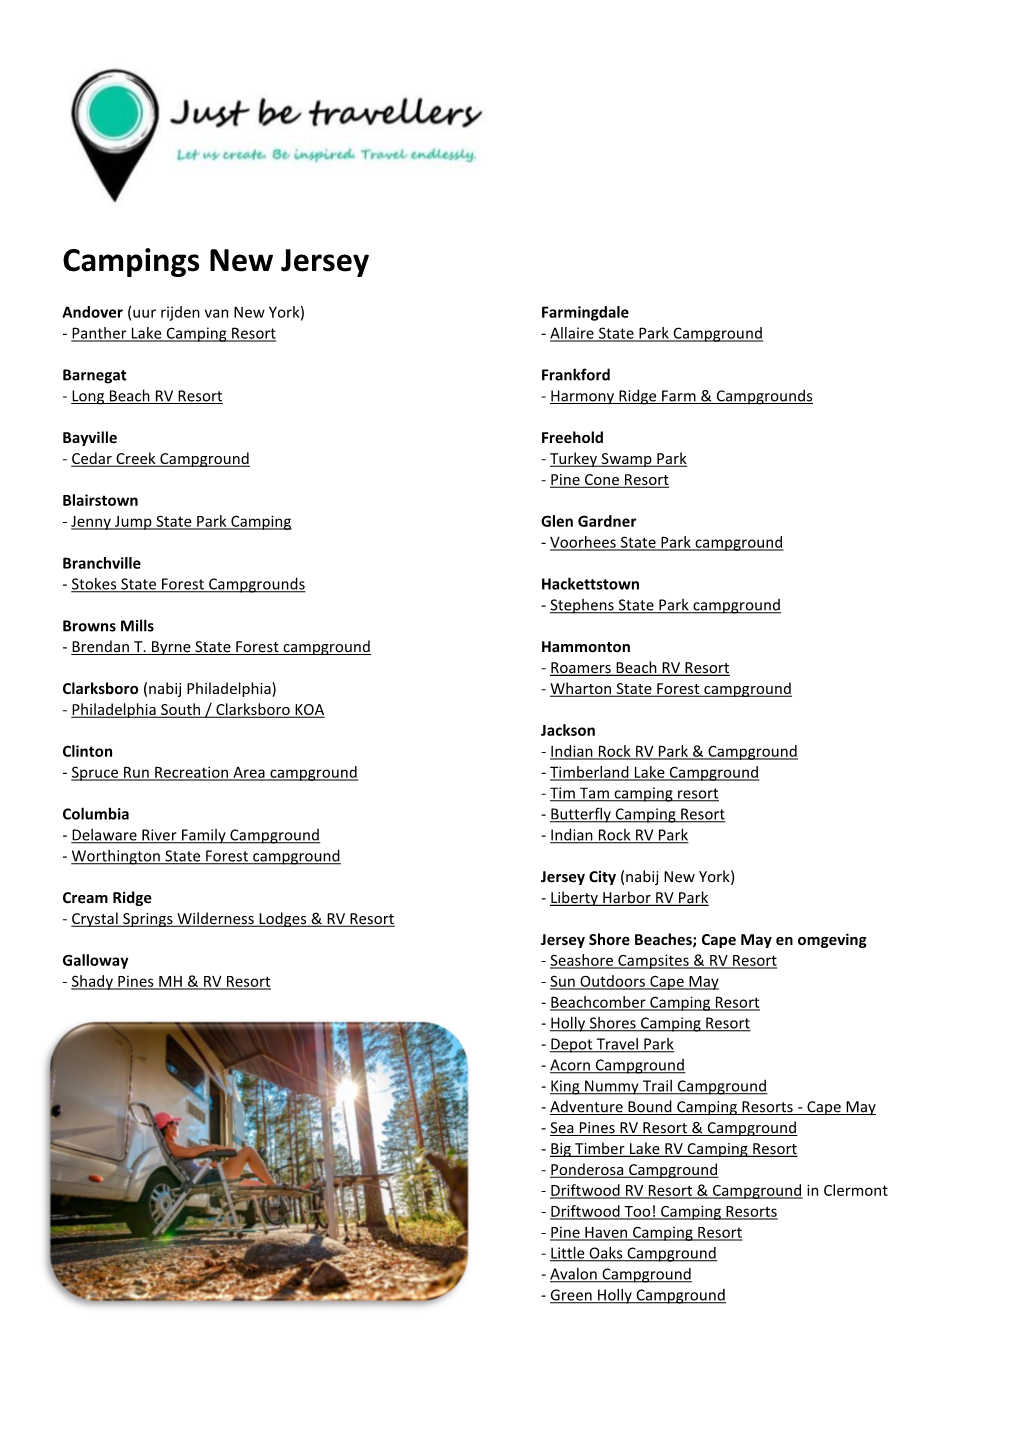 Campings New Jersey